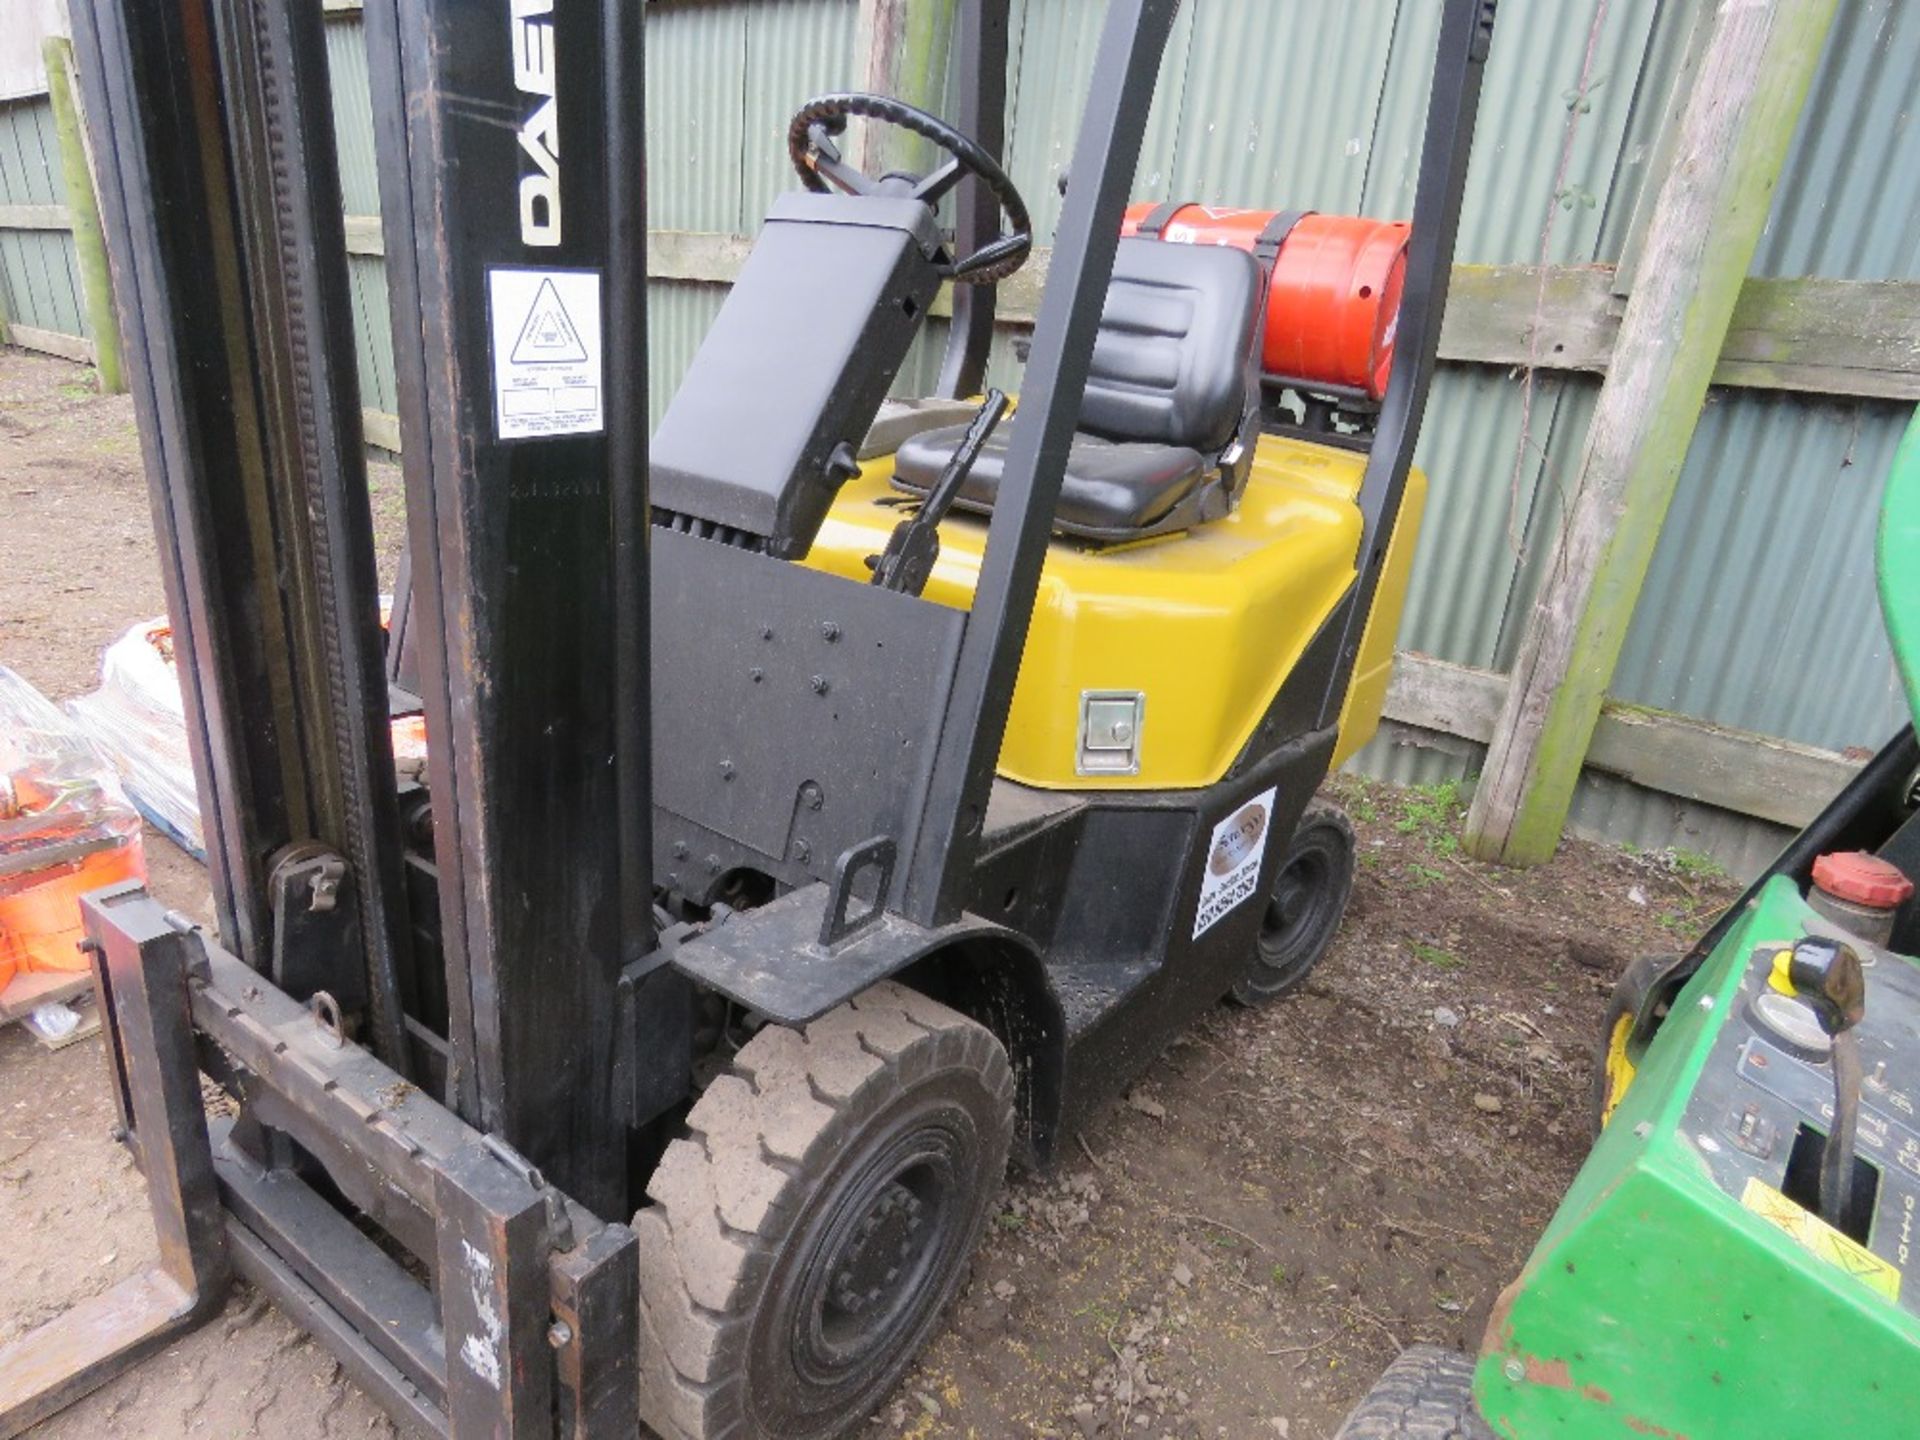 DAEWOO G18S-2 GAS POWERED FORKLIFT TRUCK WITH SIDE SHIFT. 1.8TONNE LIFT CAPACITY. 8136 REC HOURS. YE - Image 3 of 12